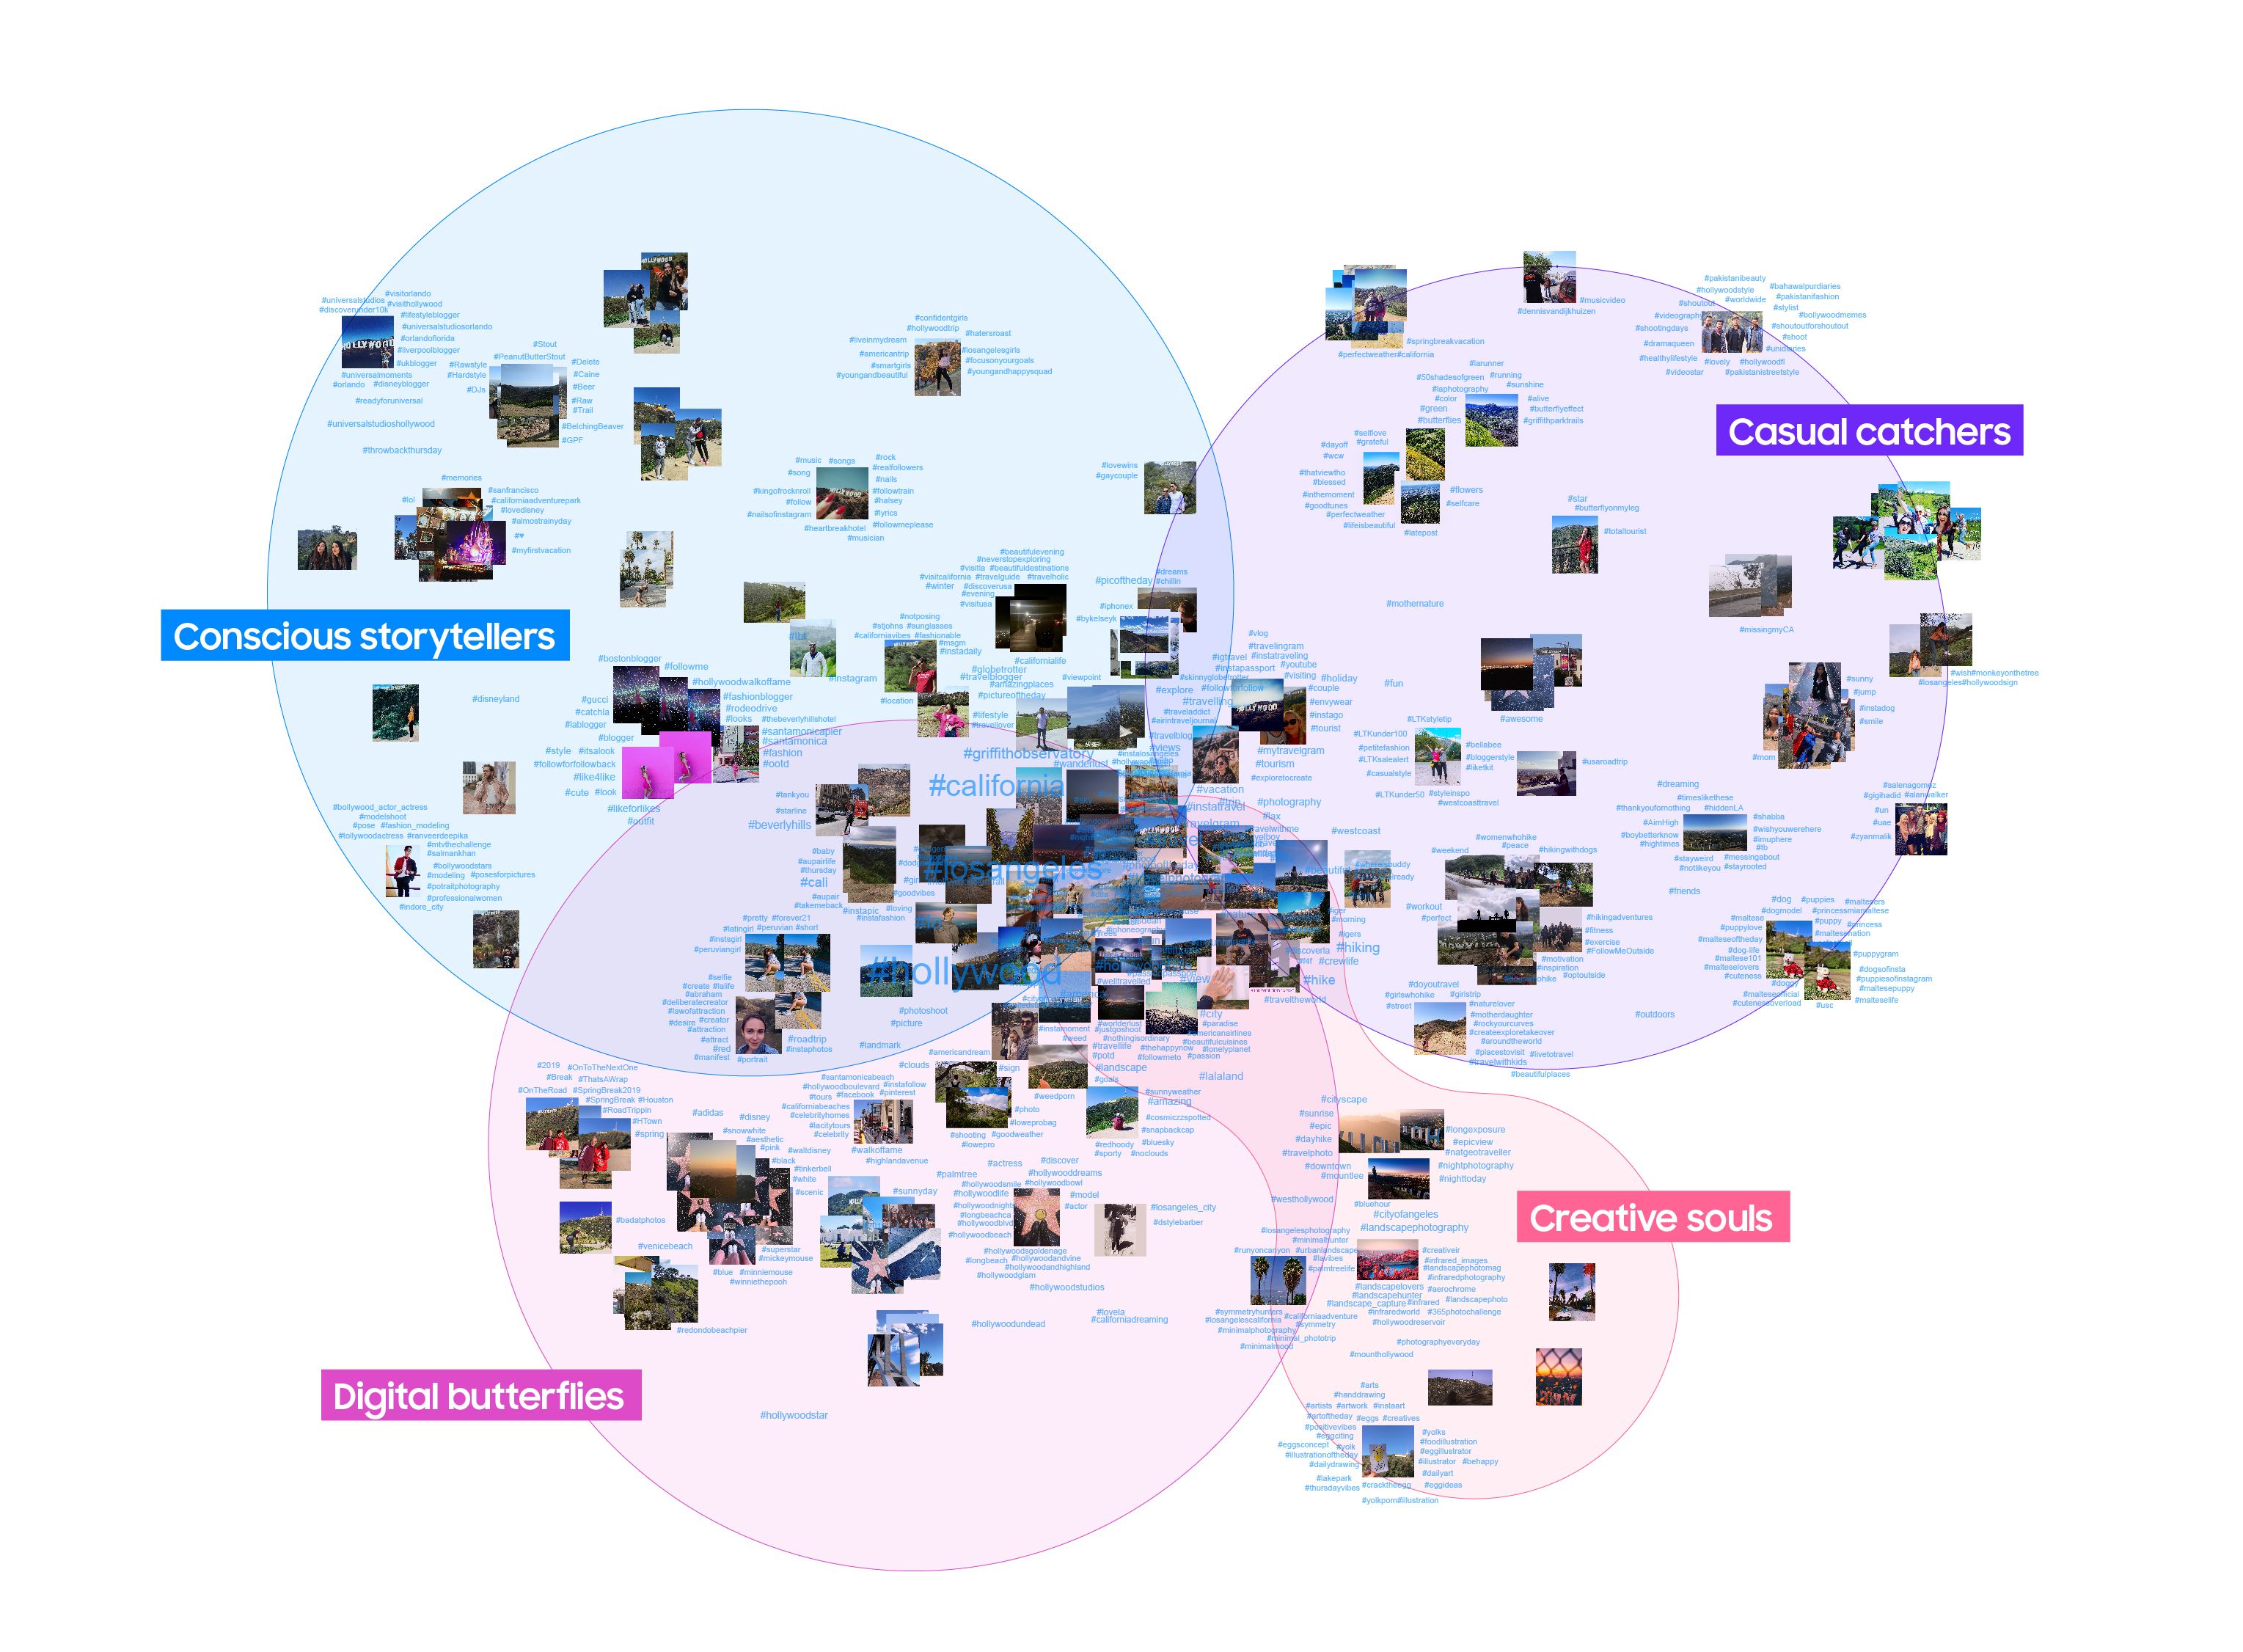 A visual network we created to show how Millennials and GenZ depict the same content on social networks